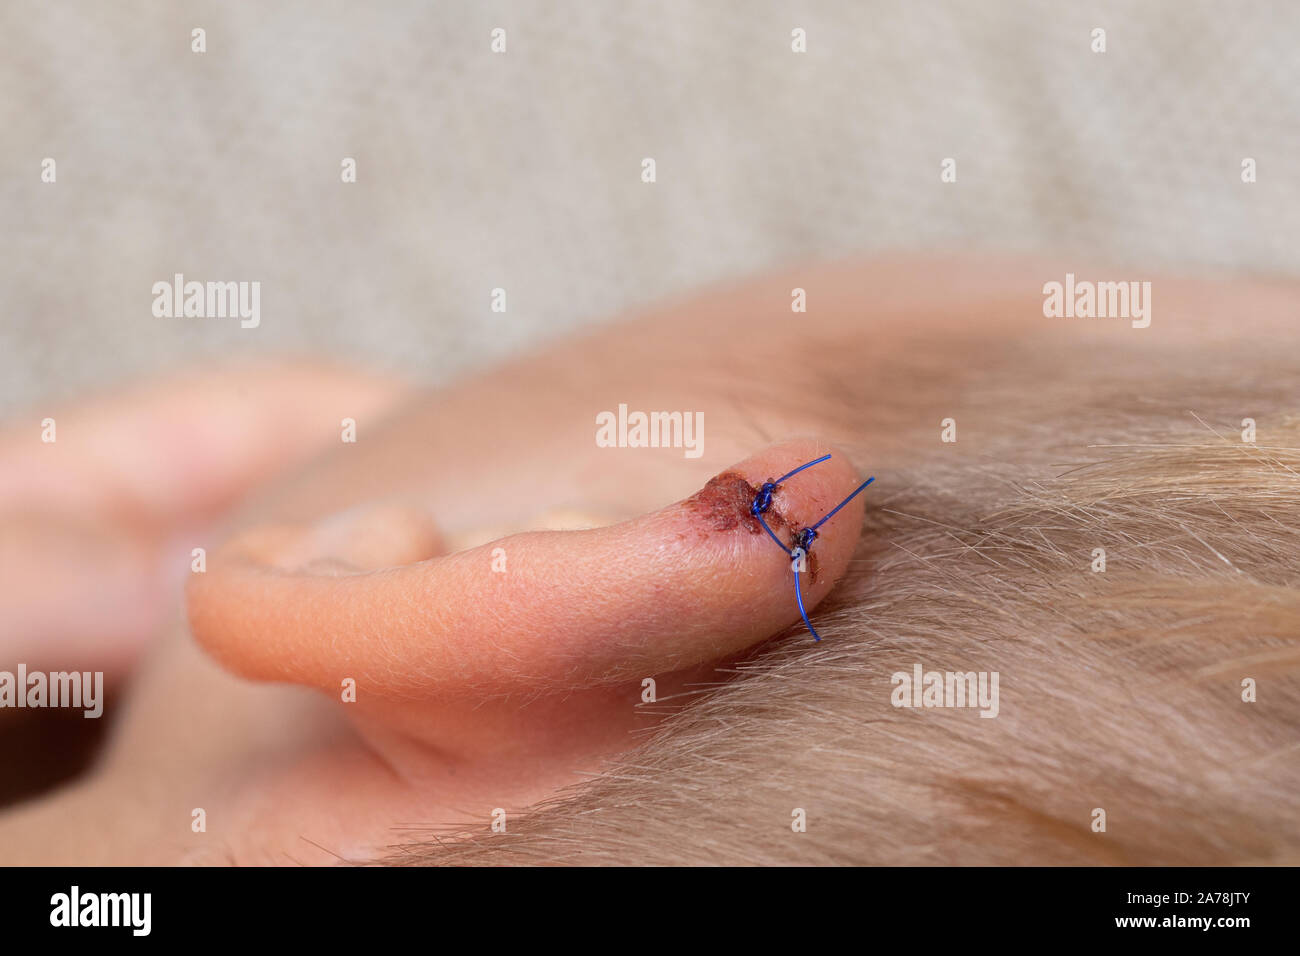 Wound stitches. Medical, surgical concept. Torn wounds with stitches on the child ear. close-up of laceration human ear with suture. Stock Photo